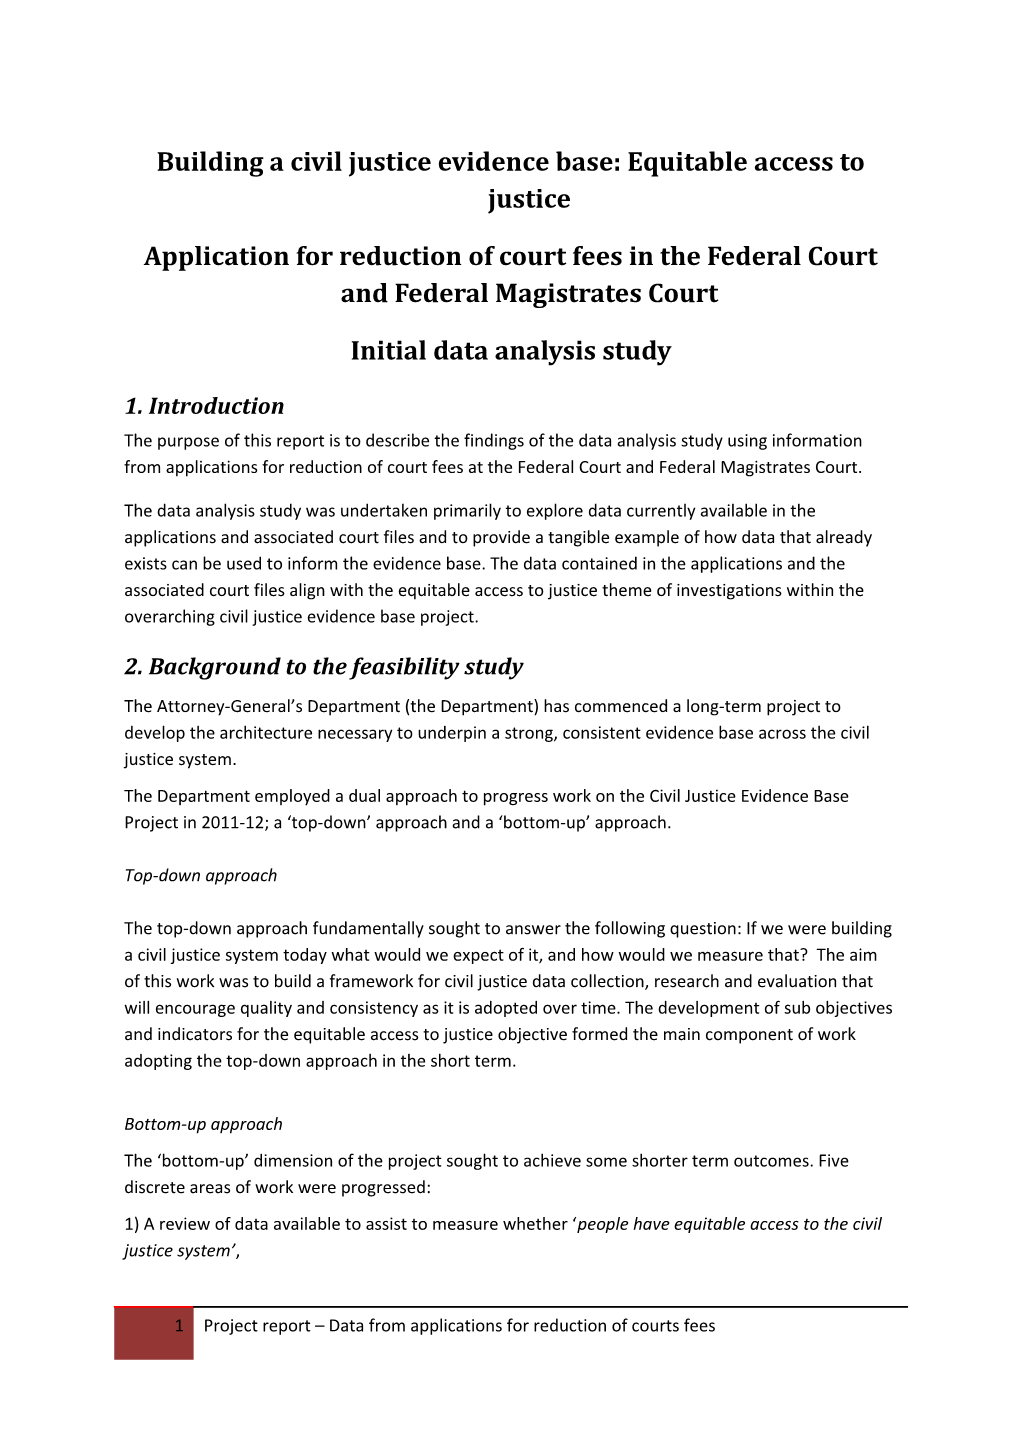 Report Application for Reduction of Court Fees in the Federal Court and Federal Magistrates